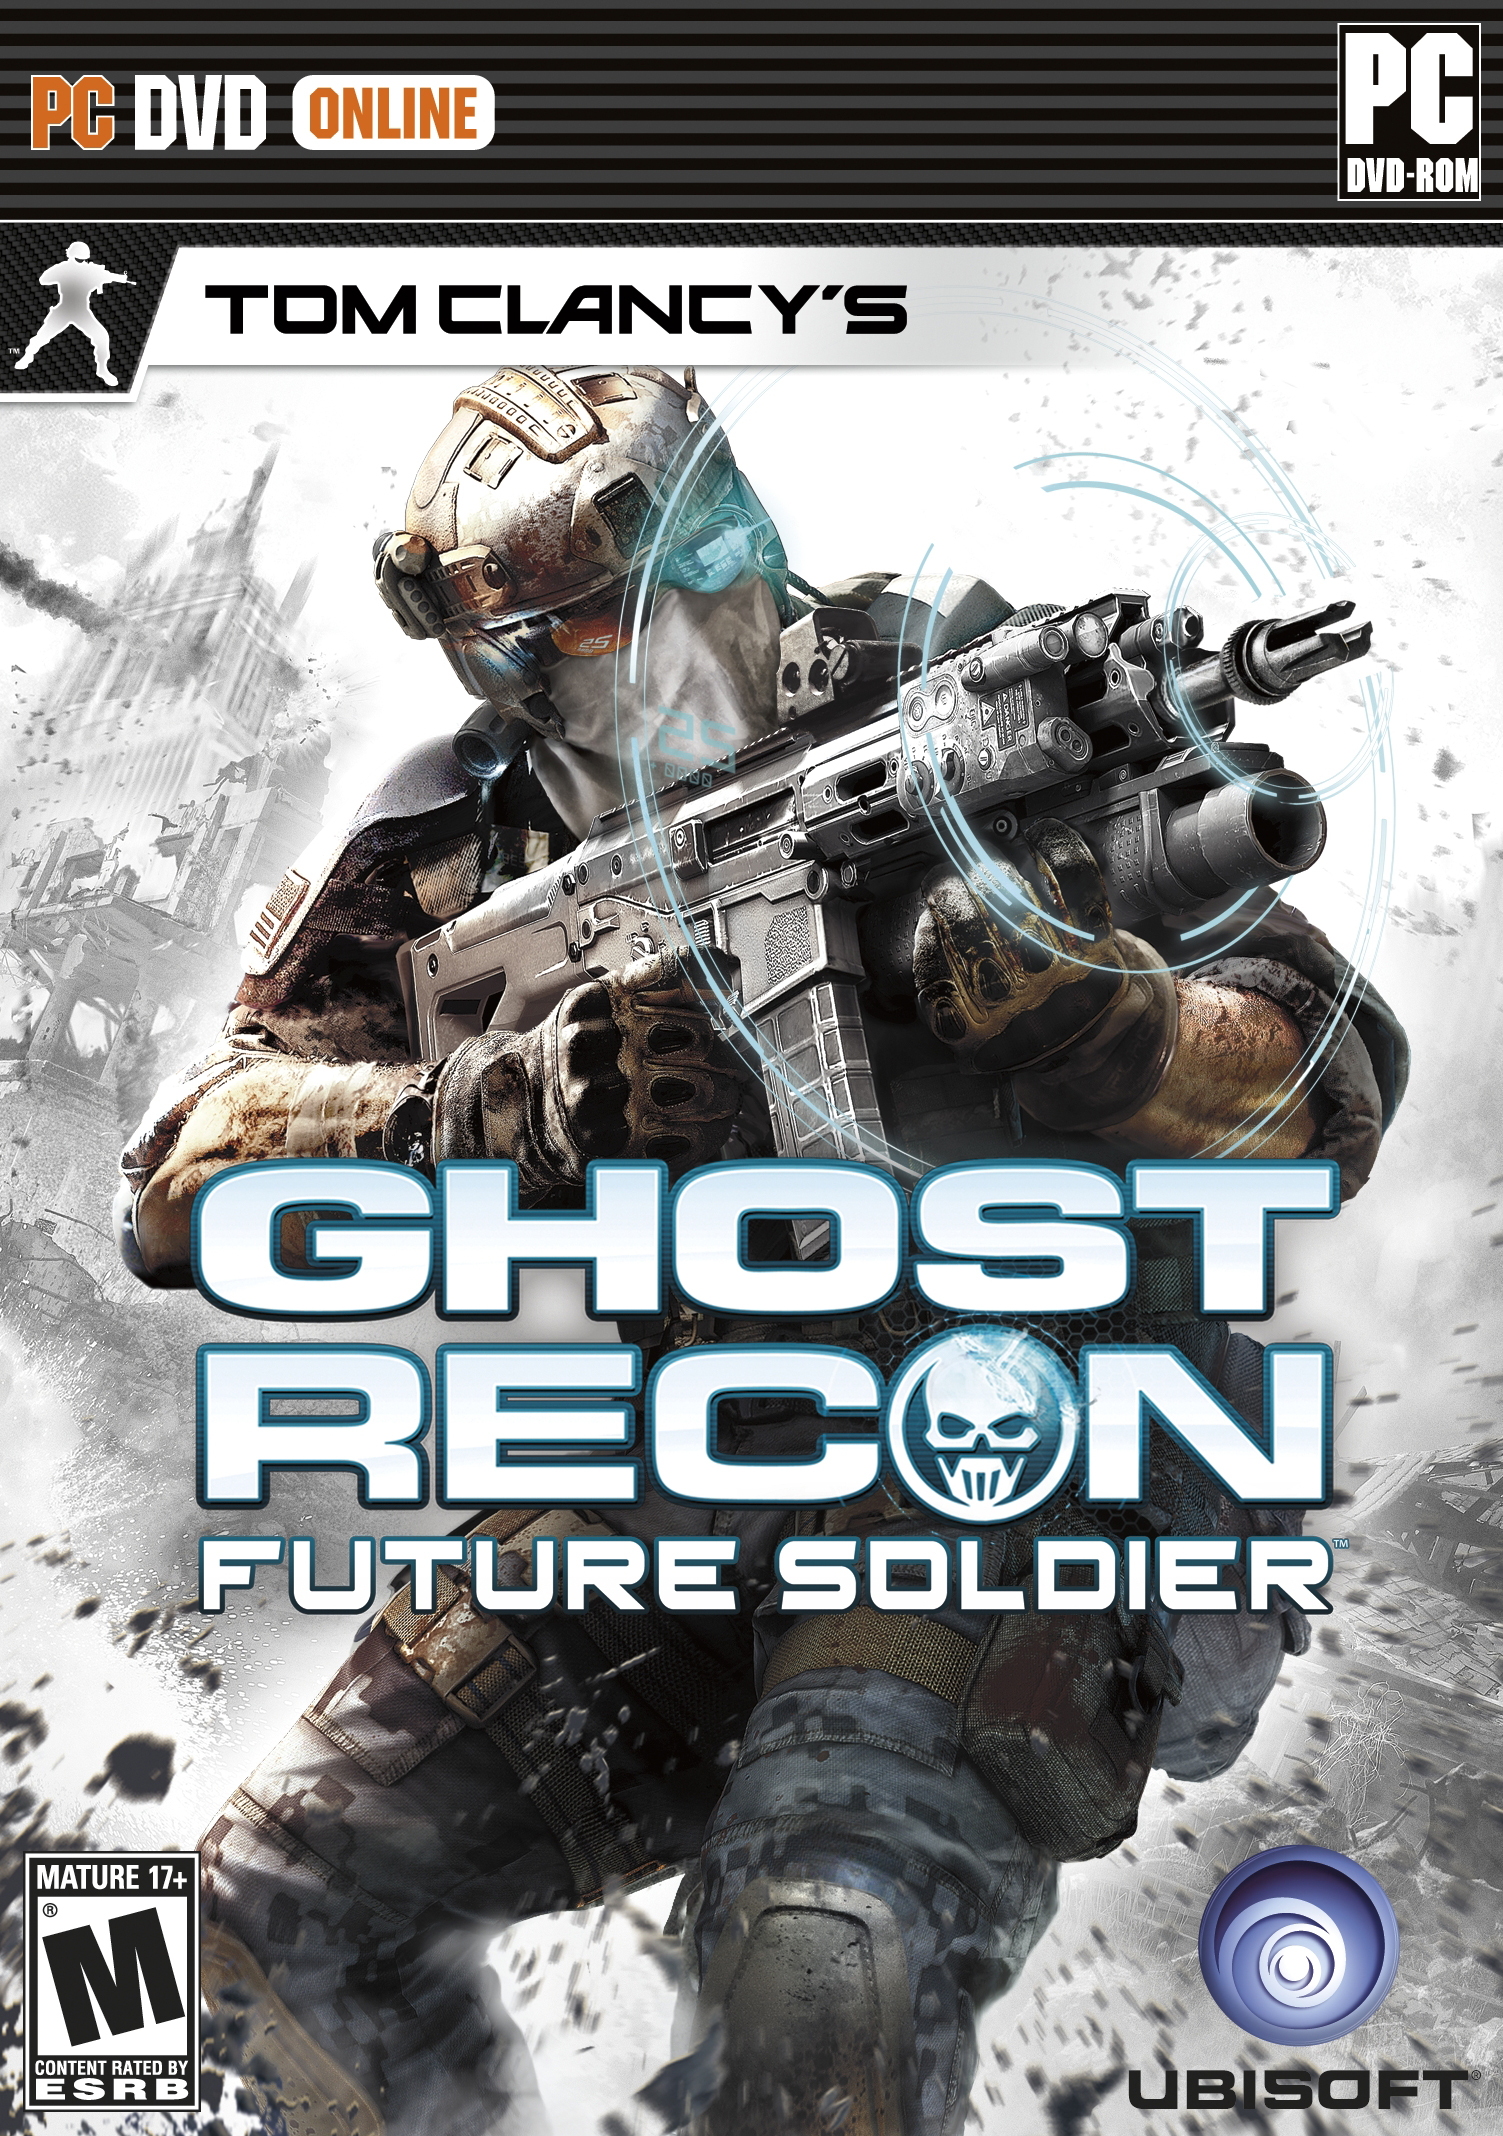 Tom Clancy's Ghost Recon: Future Soldier #16